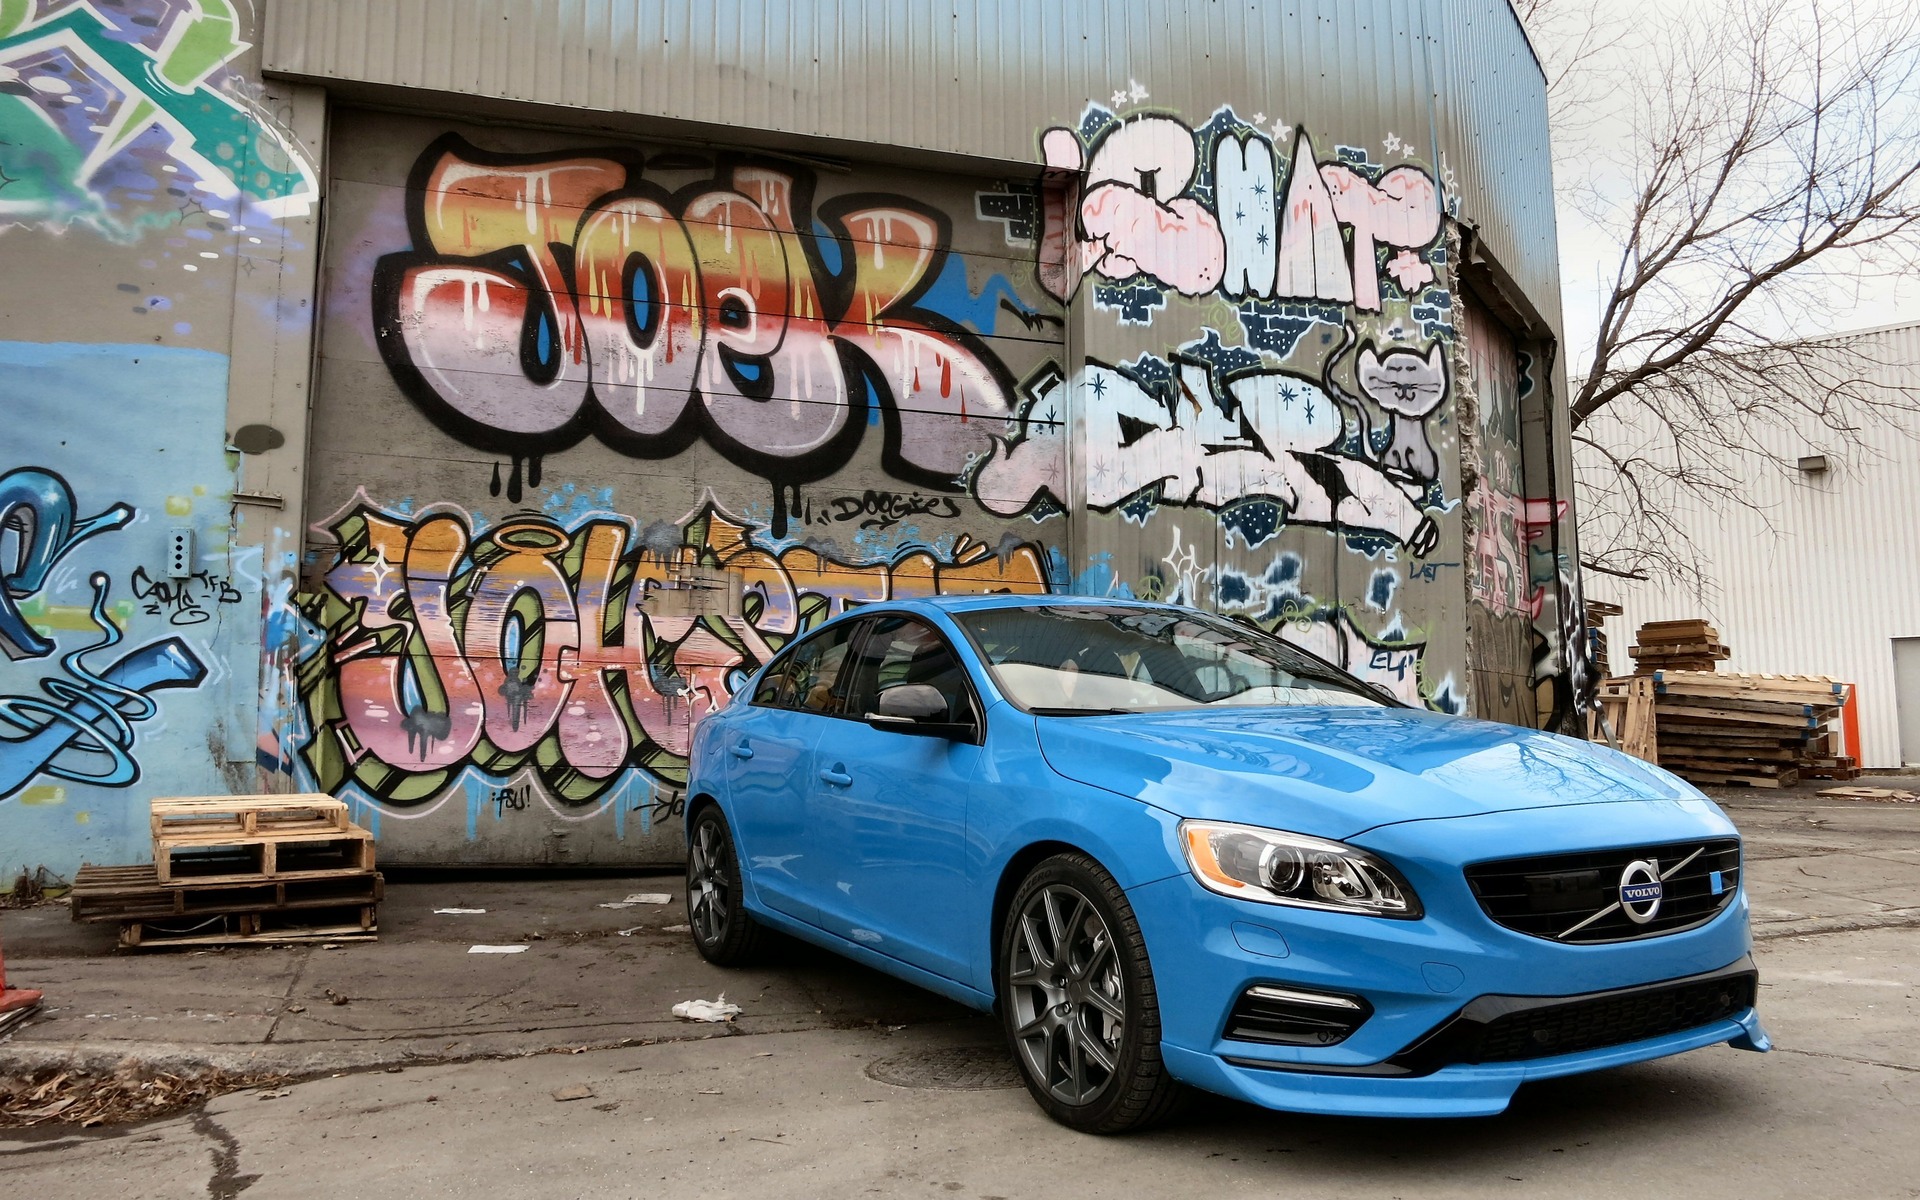 It's clear to all around you that the Volvo S60 Polestar has come to party.